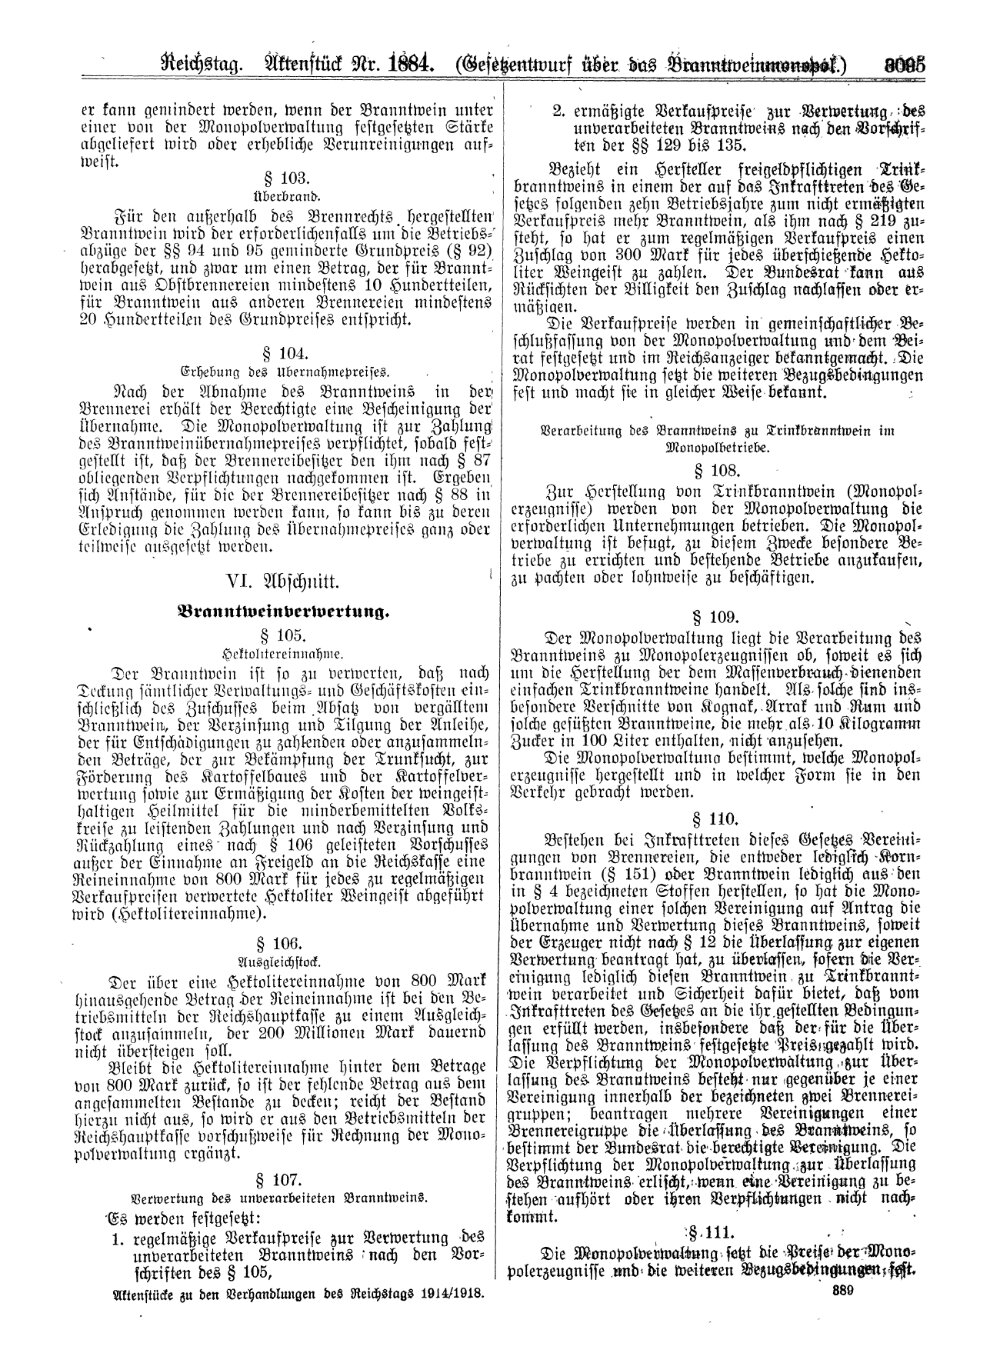 Scan of page 3095